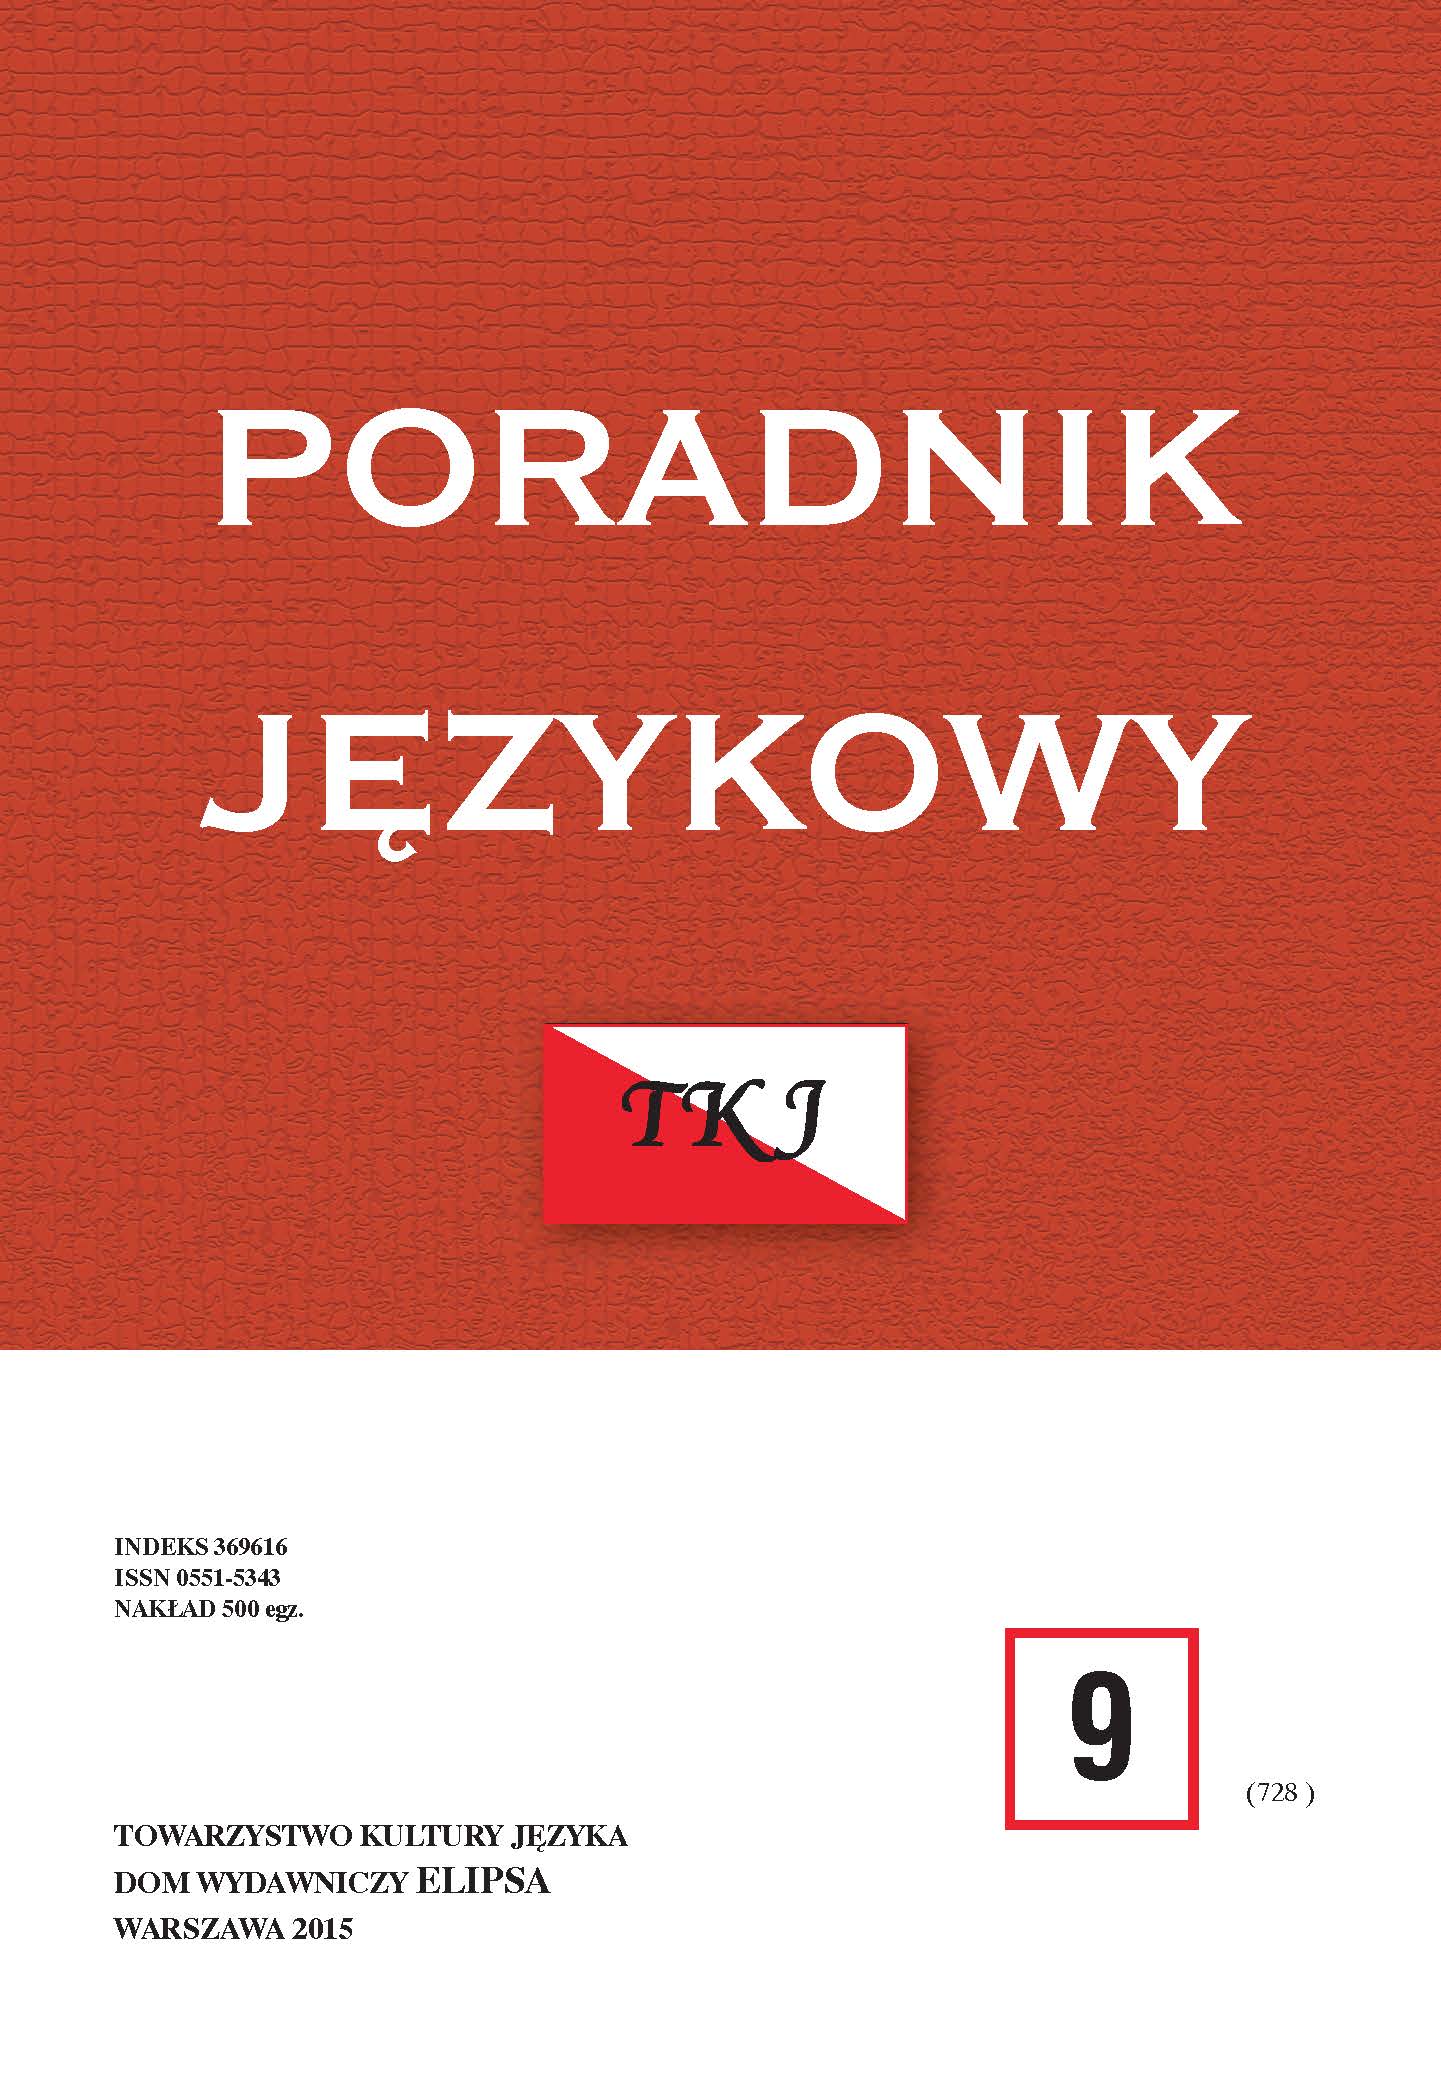 Populising the knowledge of language on Natemat.pl portal Cover Image